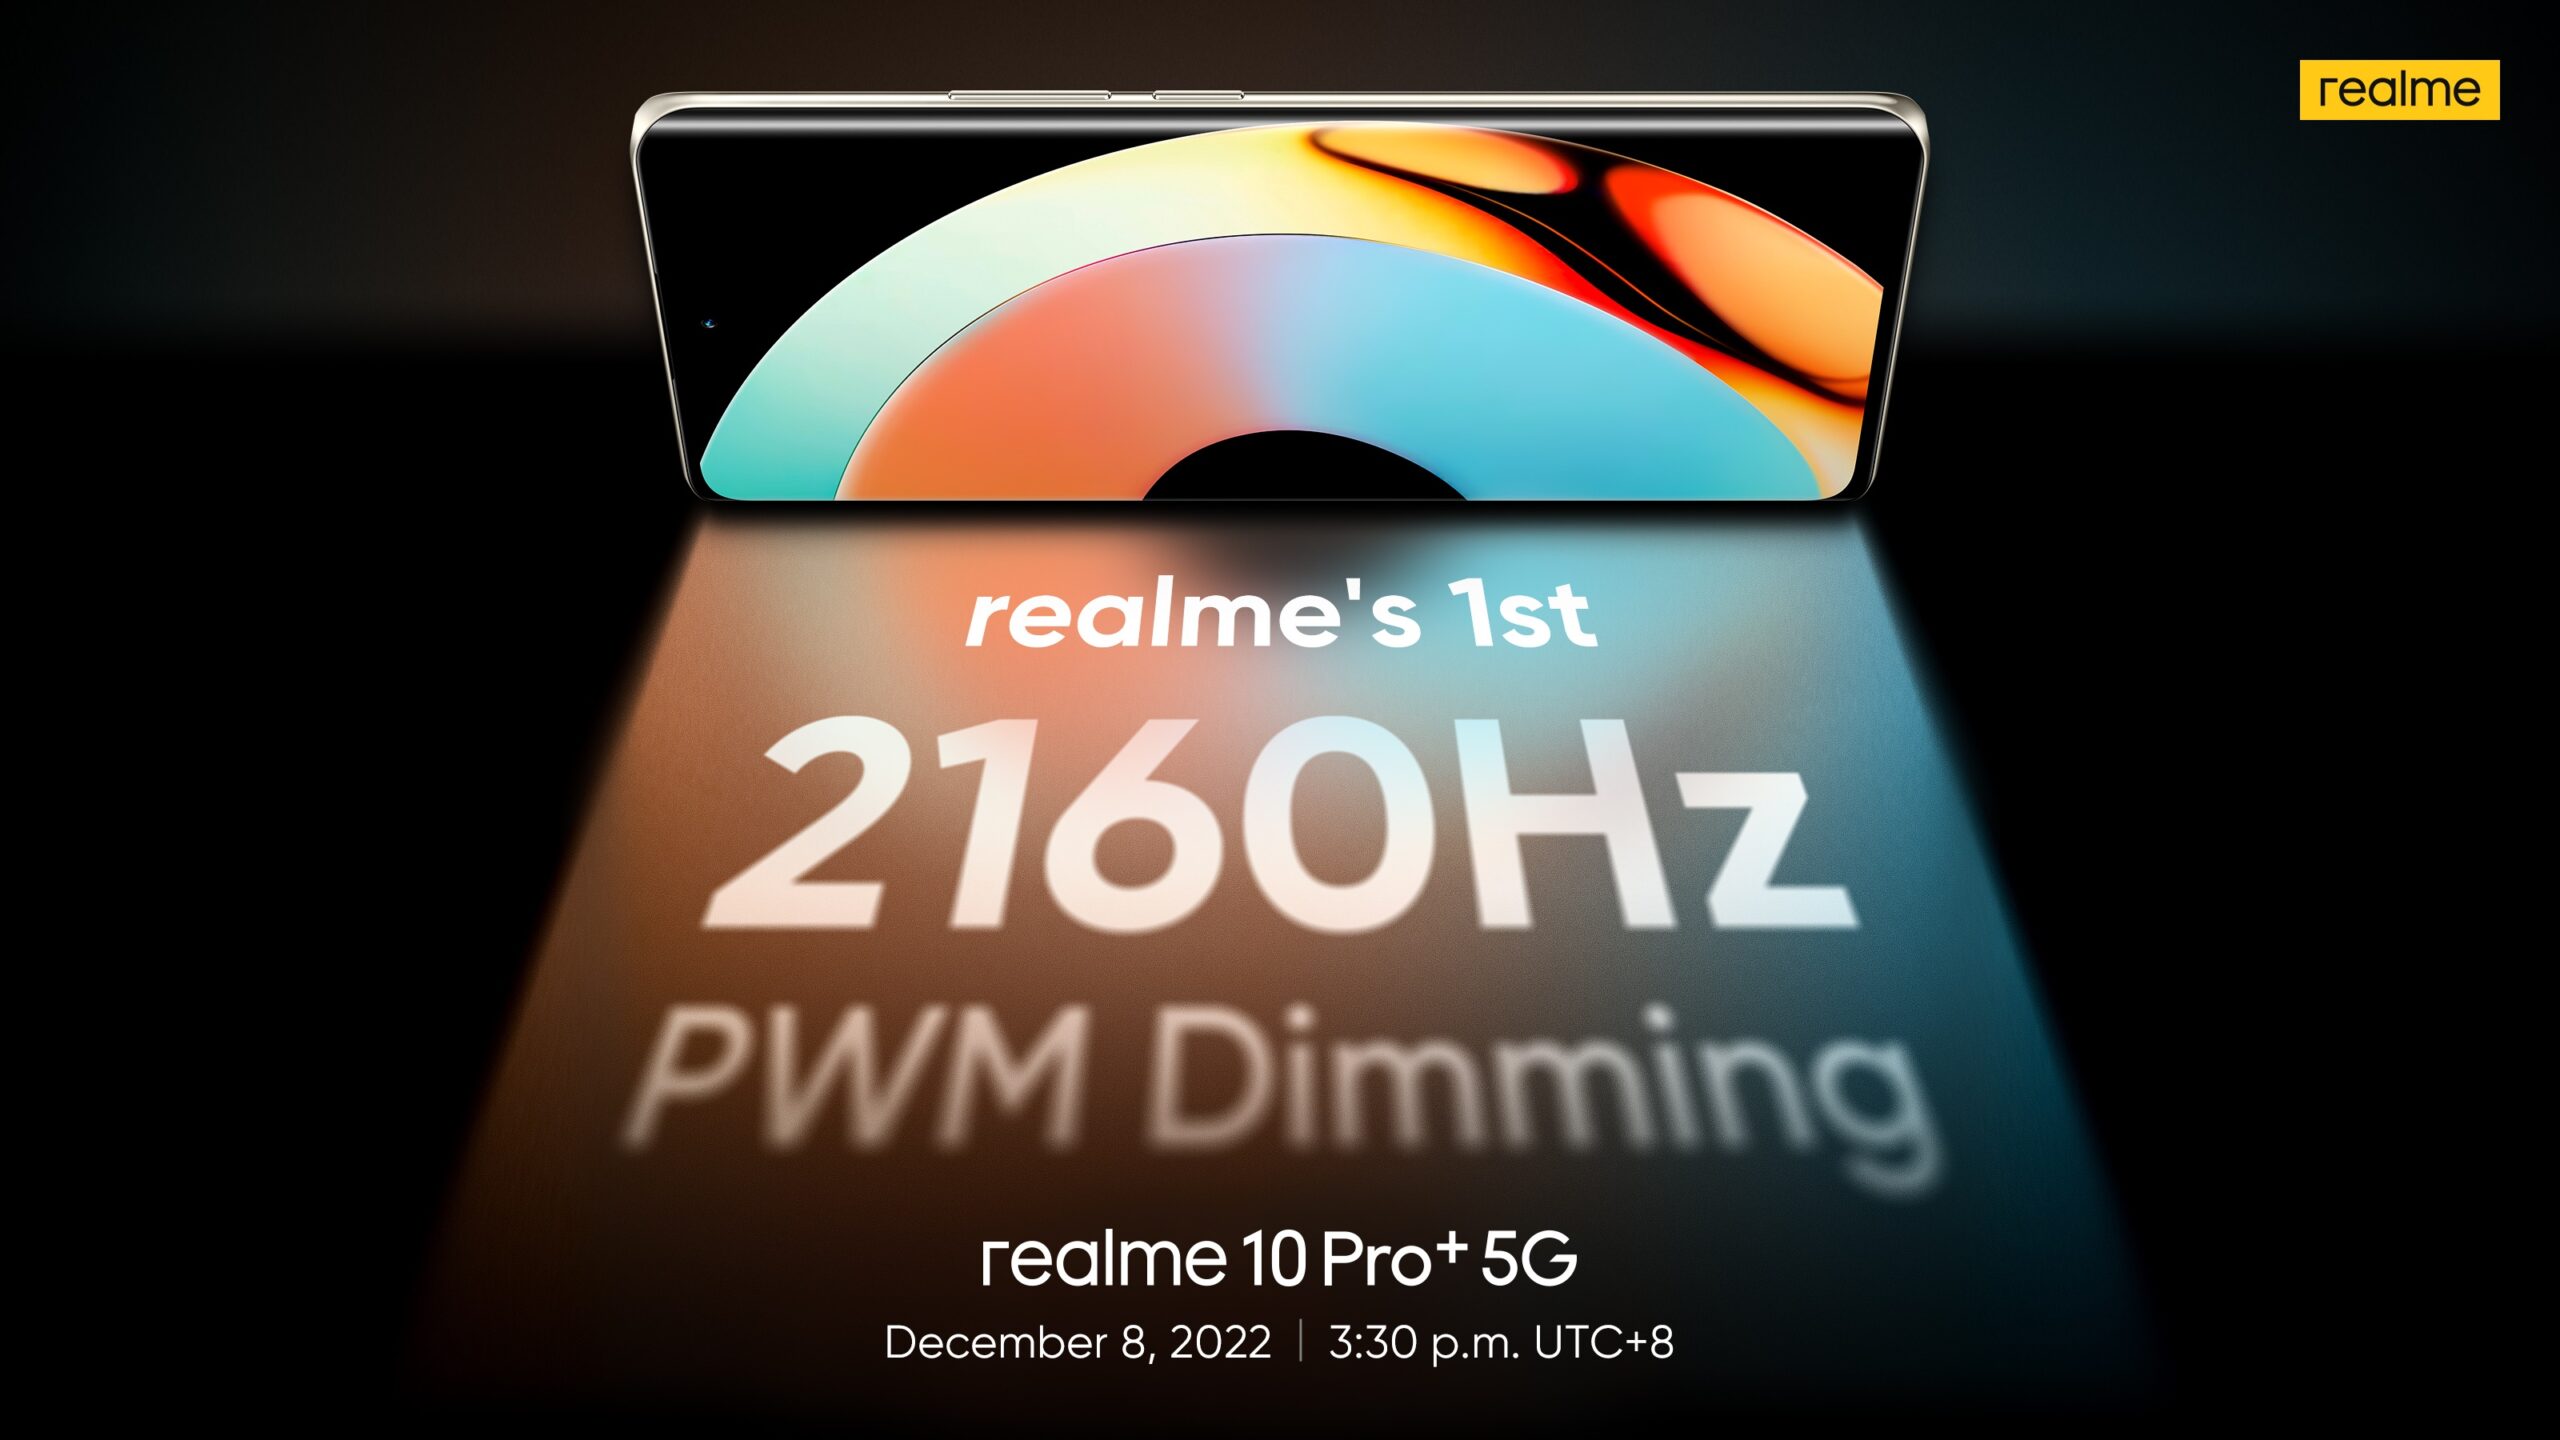 realme 10 Pro 5G 2160 PWM Dimming 1 scaled